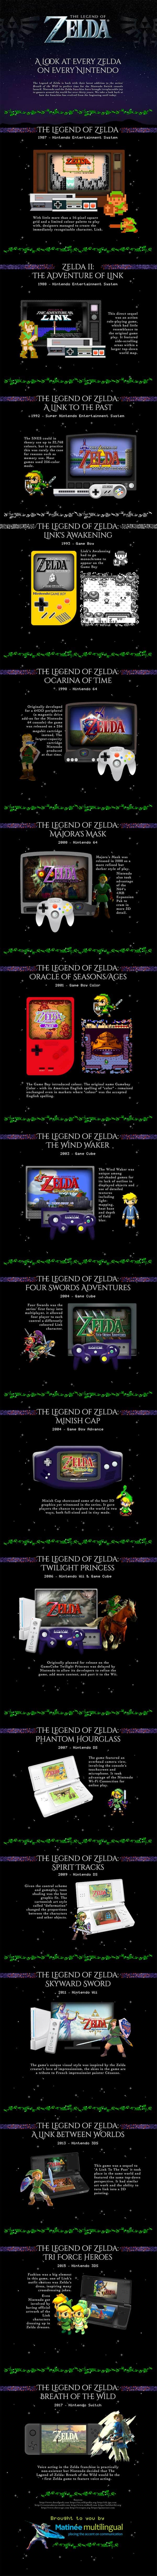 Take a A Look at Every Legend of Zelda on Every Nintendo Ever